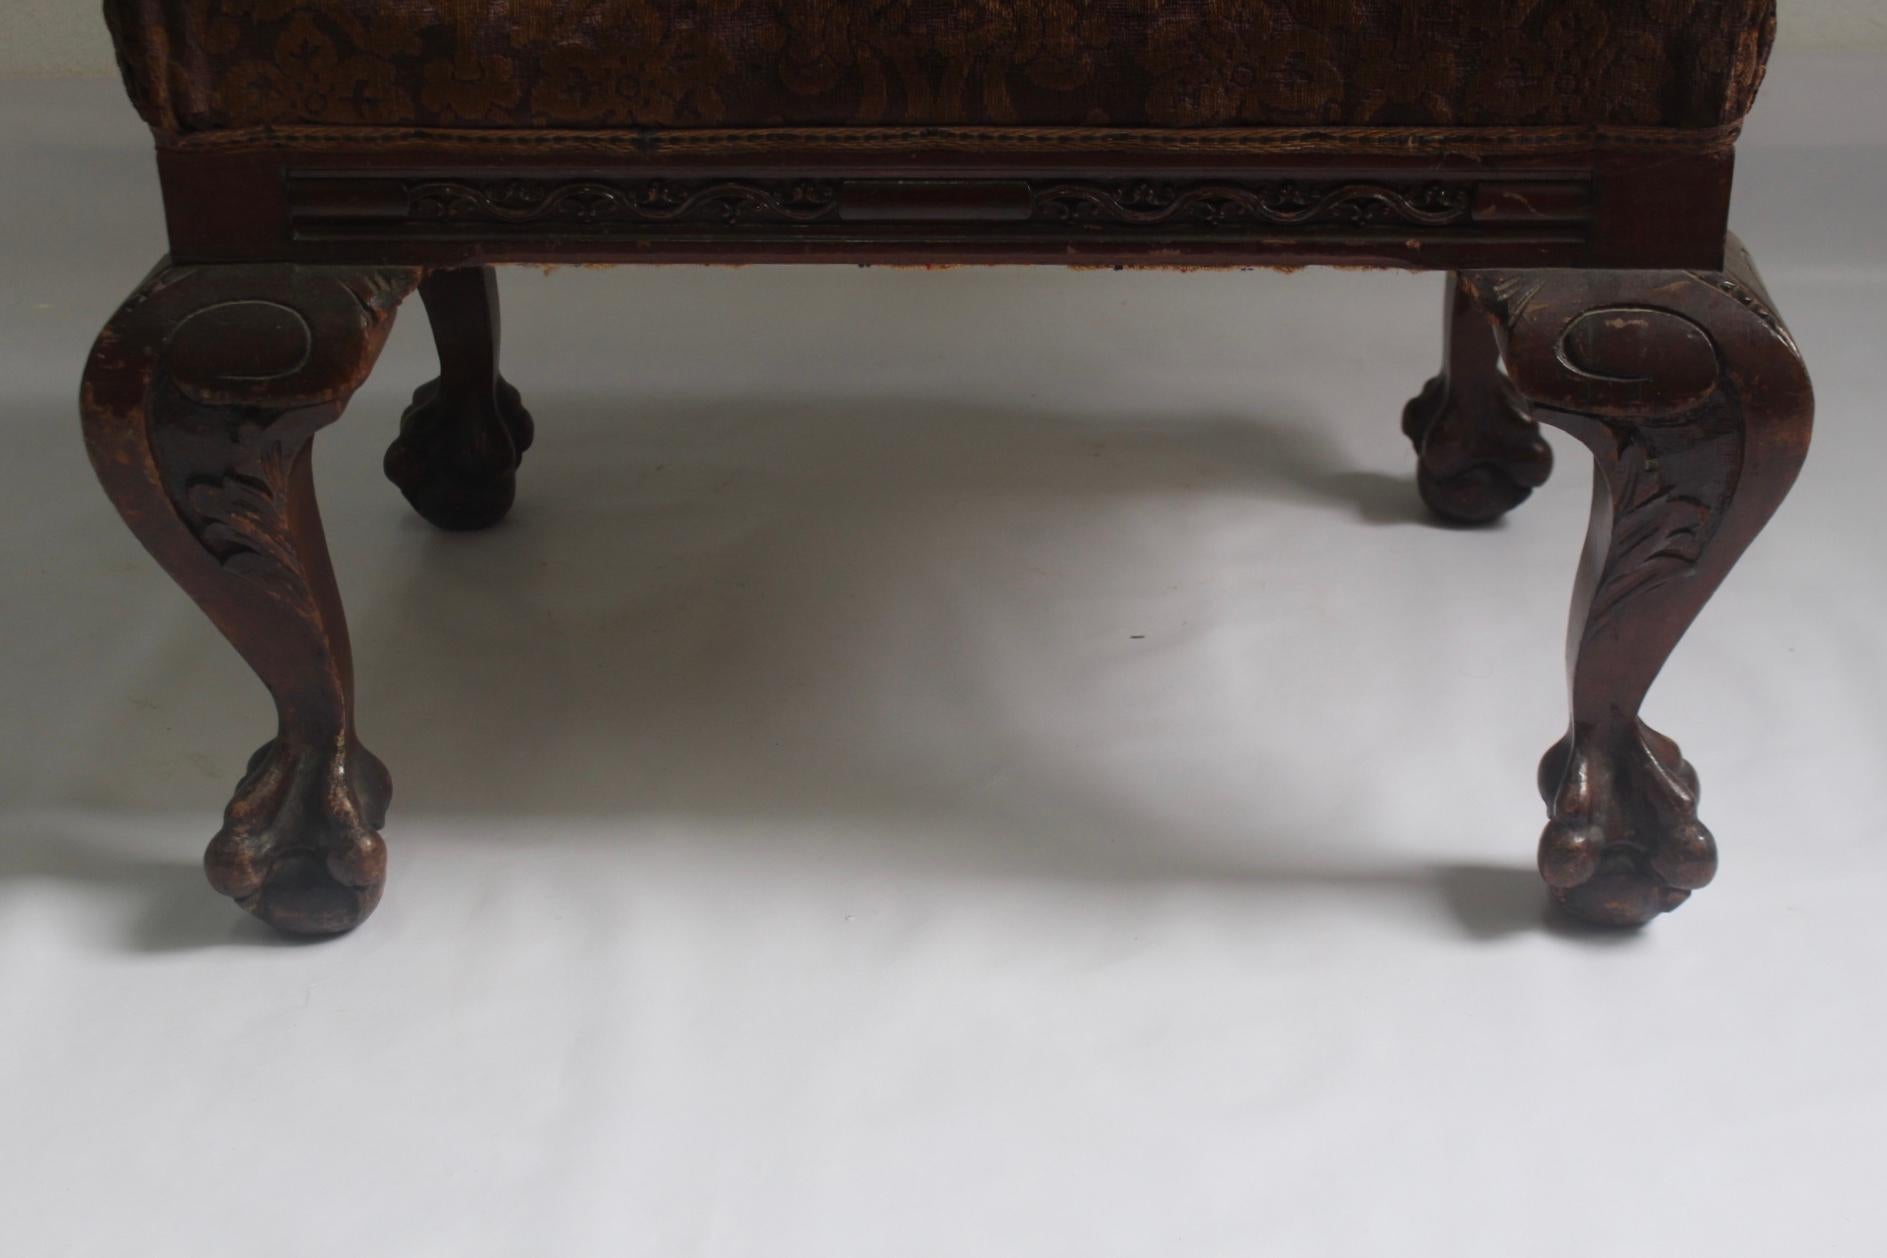 1910s Chippendale Mahogany Ottoman or Stool with Original Velvet Upholstery For Sale 6